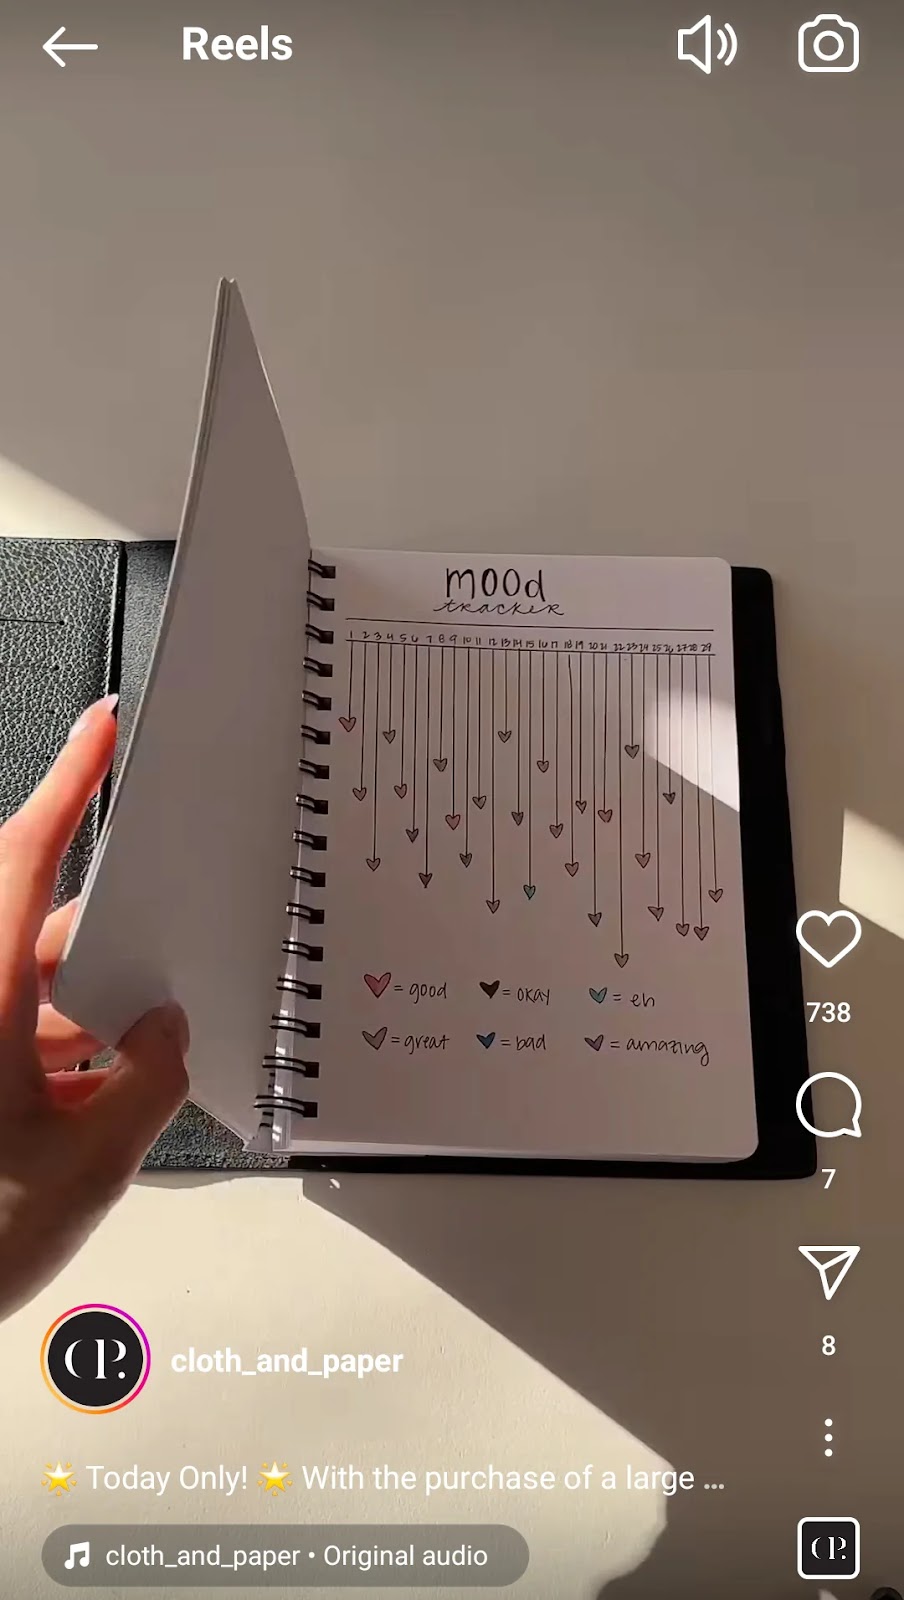 Cloth and Paper Instagram reel featuring a one-day promotion